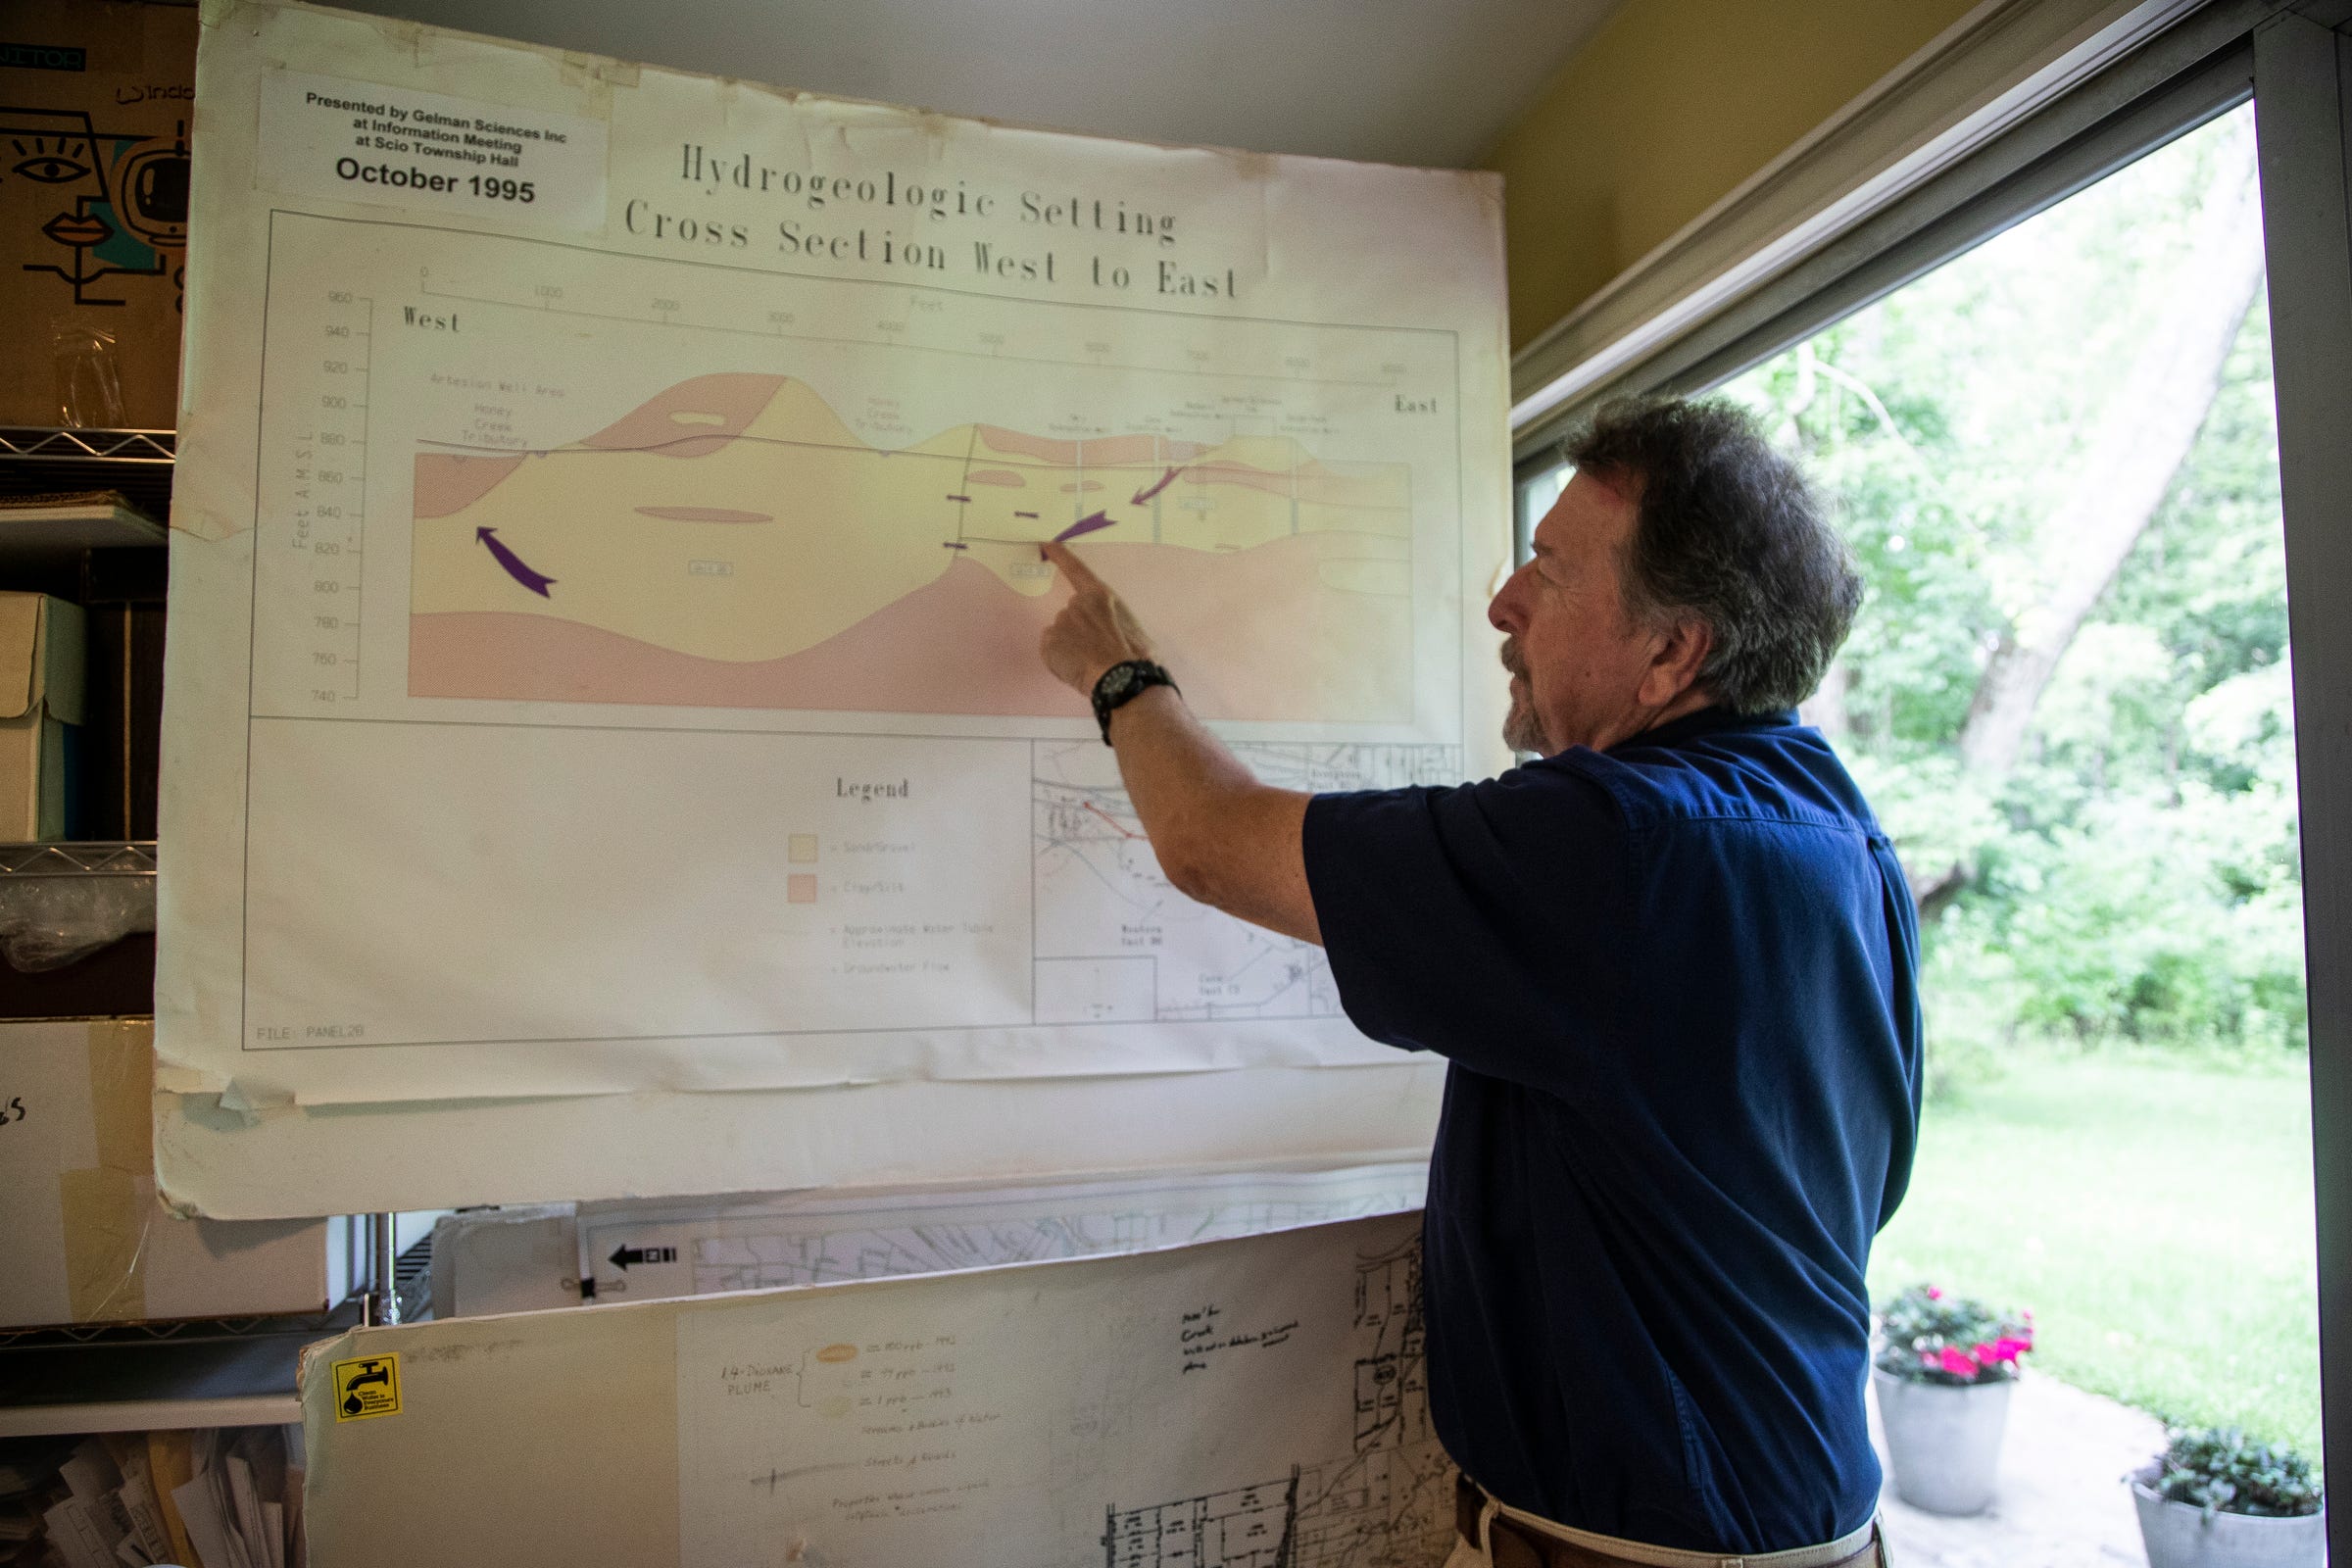 Roger Rayle, chair of Coalition for Action on Remediation of Dioxane, at his home in Scio Township on July 9, 2021, shows a graphic illustration of dioxane pollution presented by Gelman Science at a public hearing in 1995.